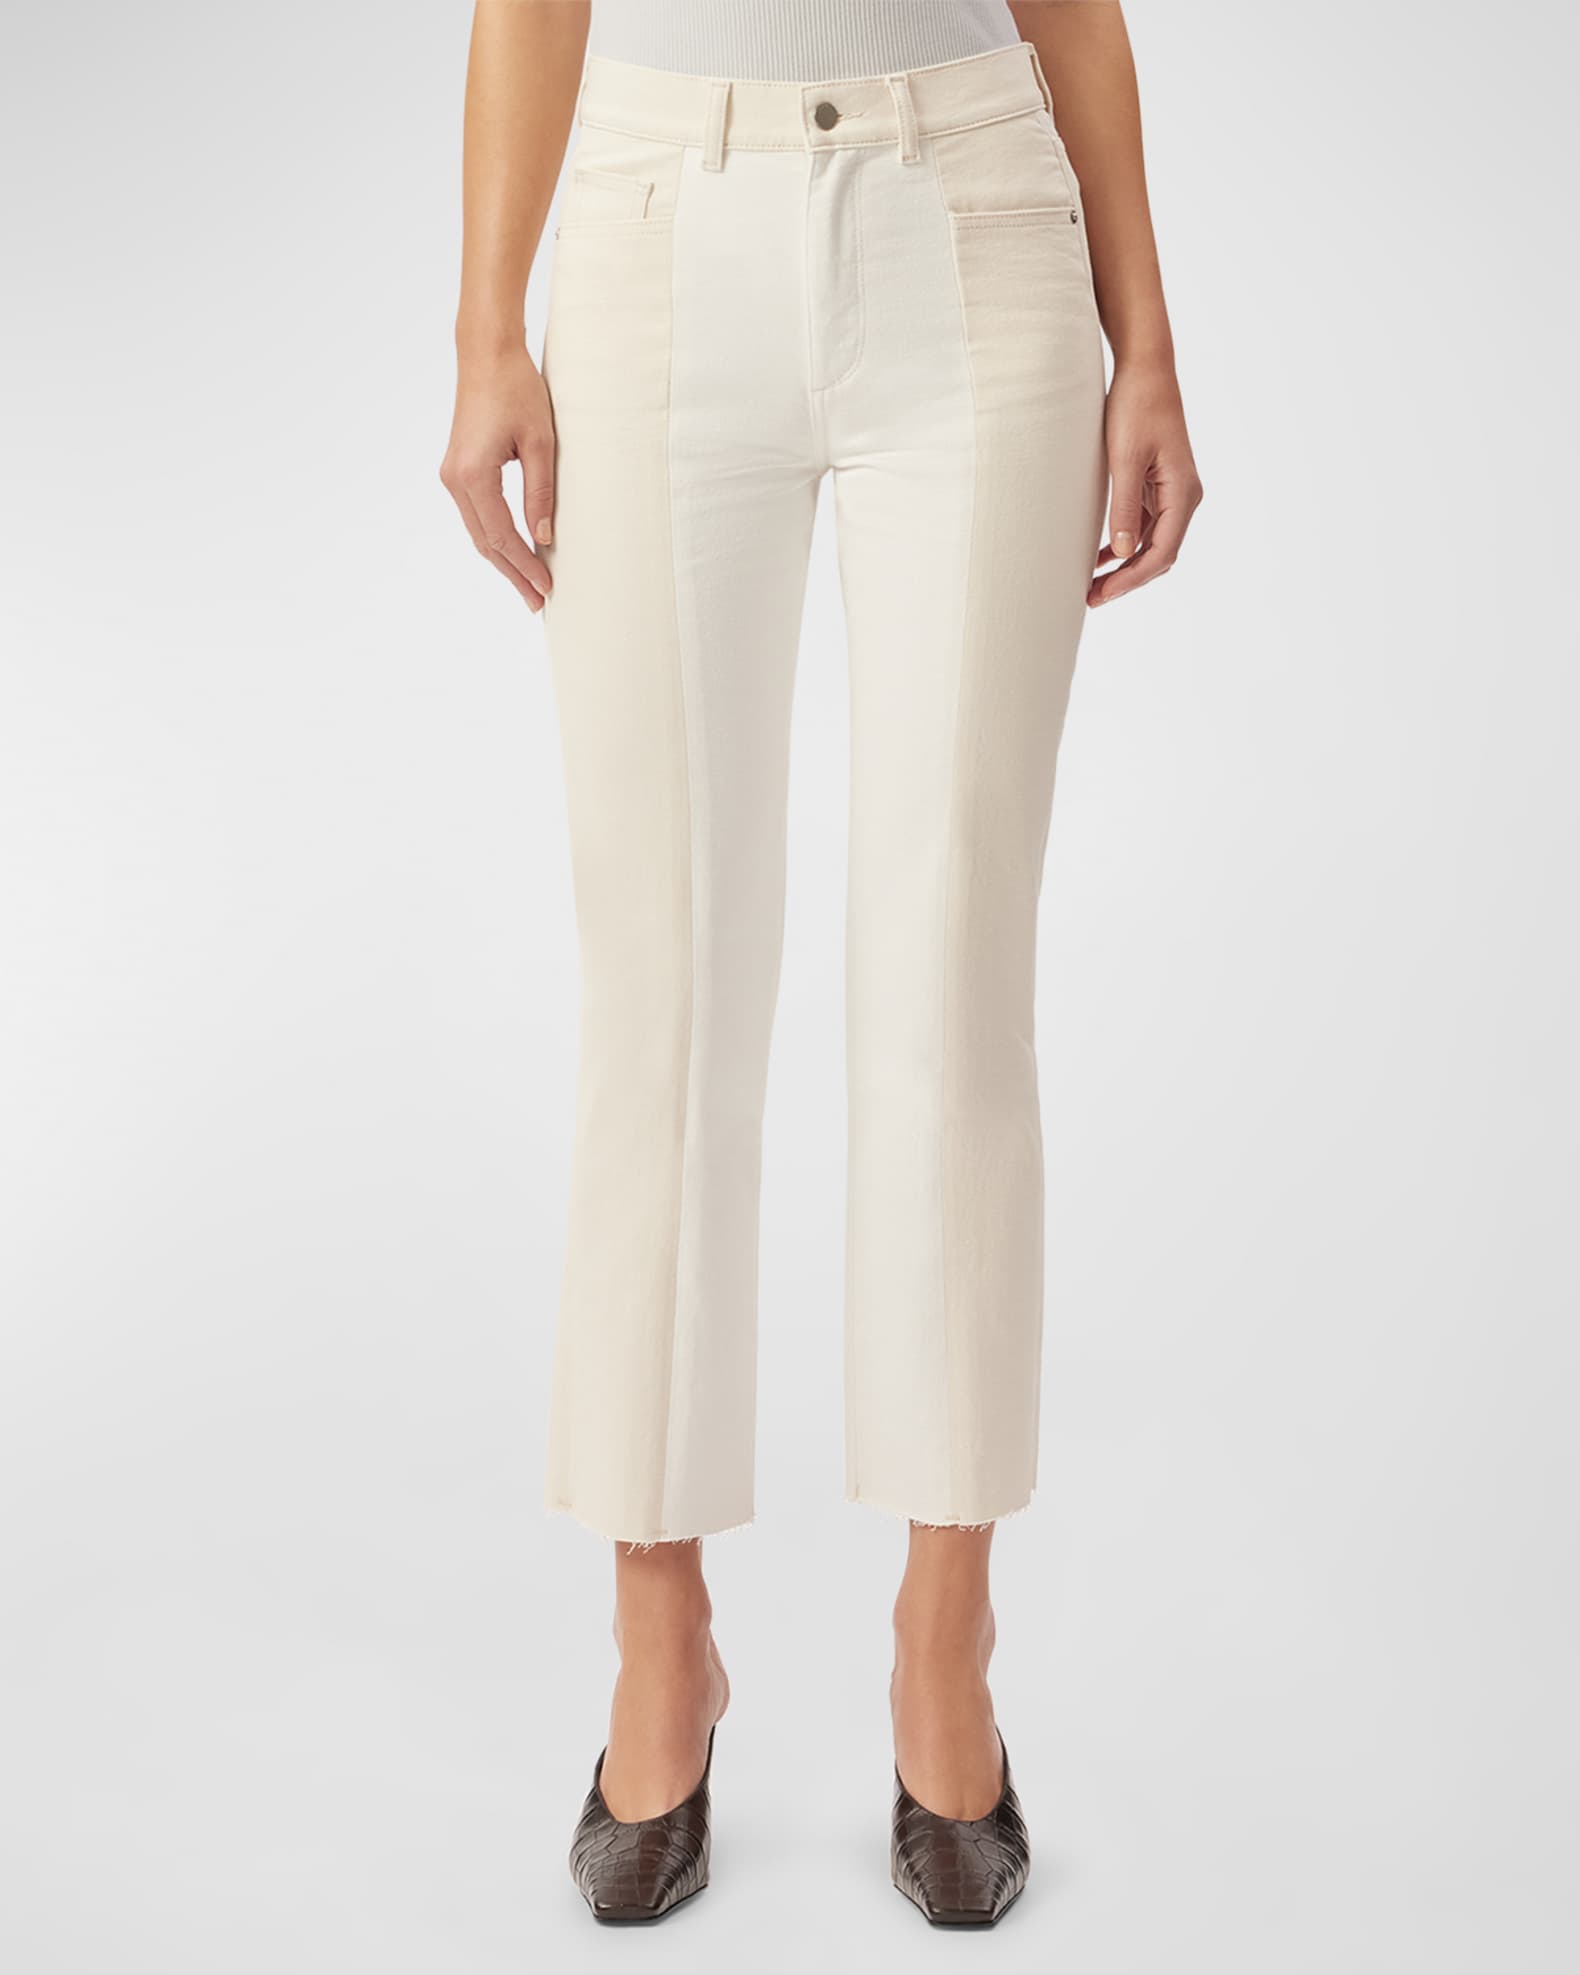 DL1961 Patti Straight High Rise Vintage Ankle Jeans | Neiman Marcus